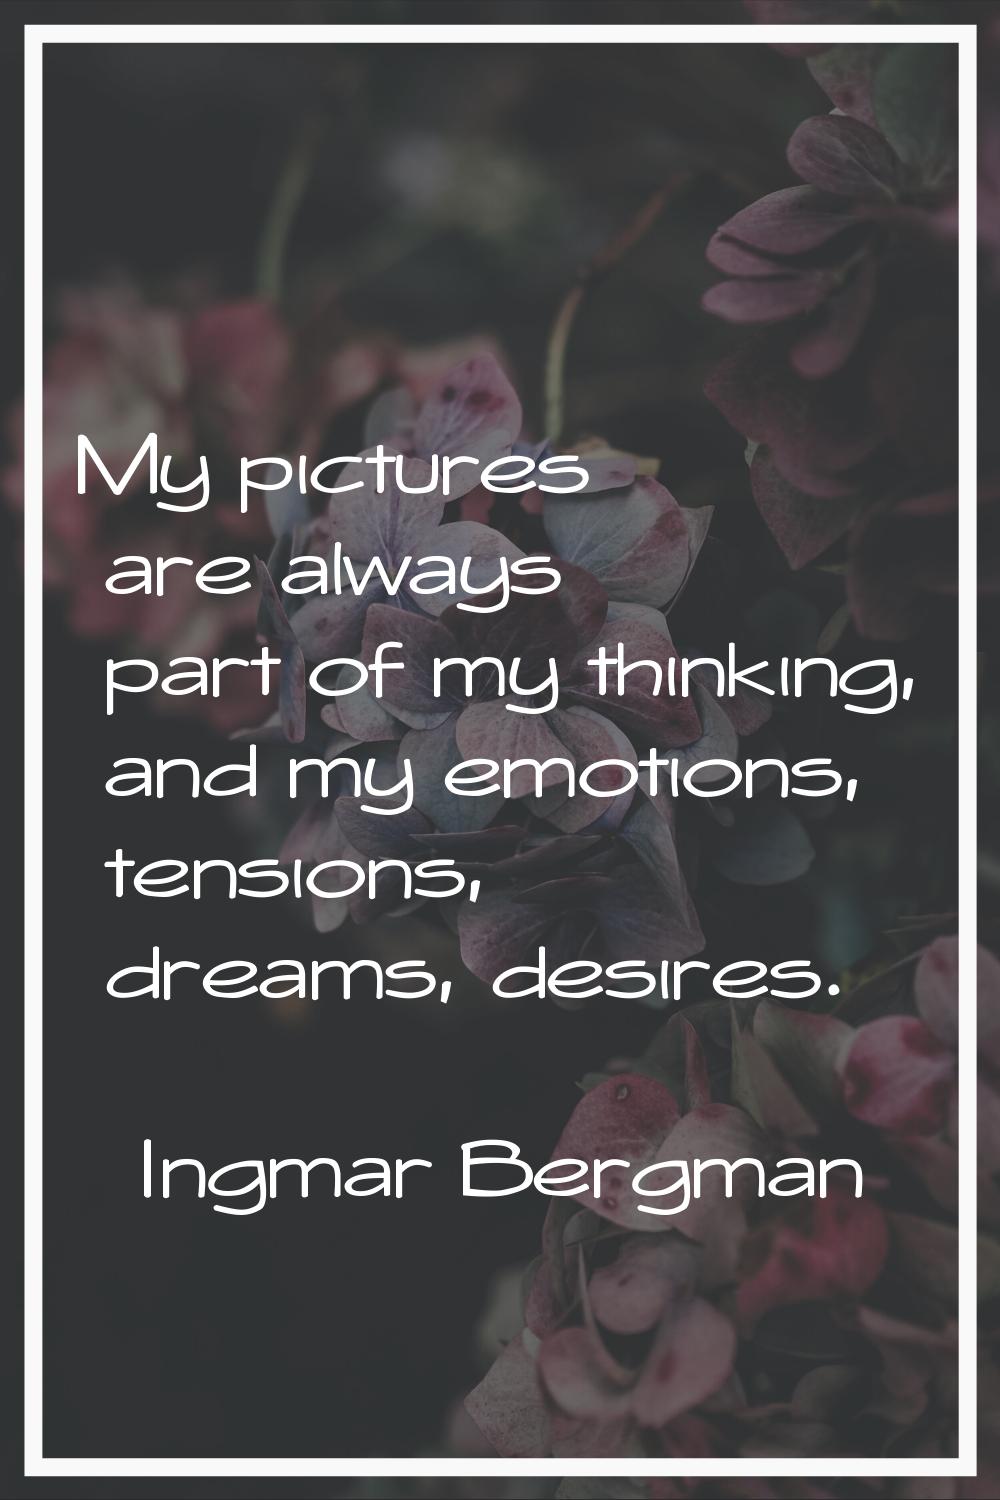 My pictures are always part of my thinking, and my emotions, tensions, dreams, desires.